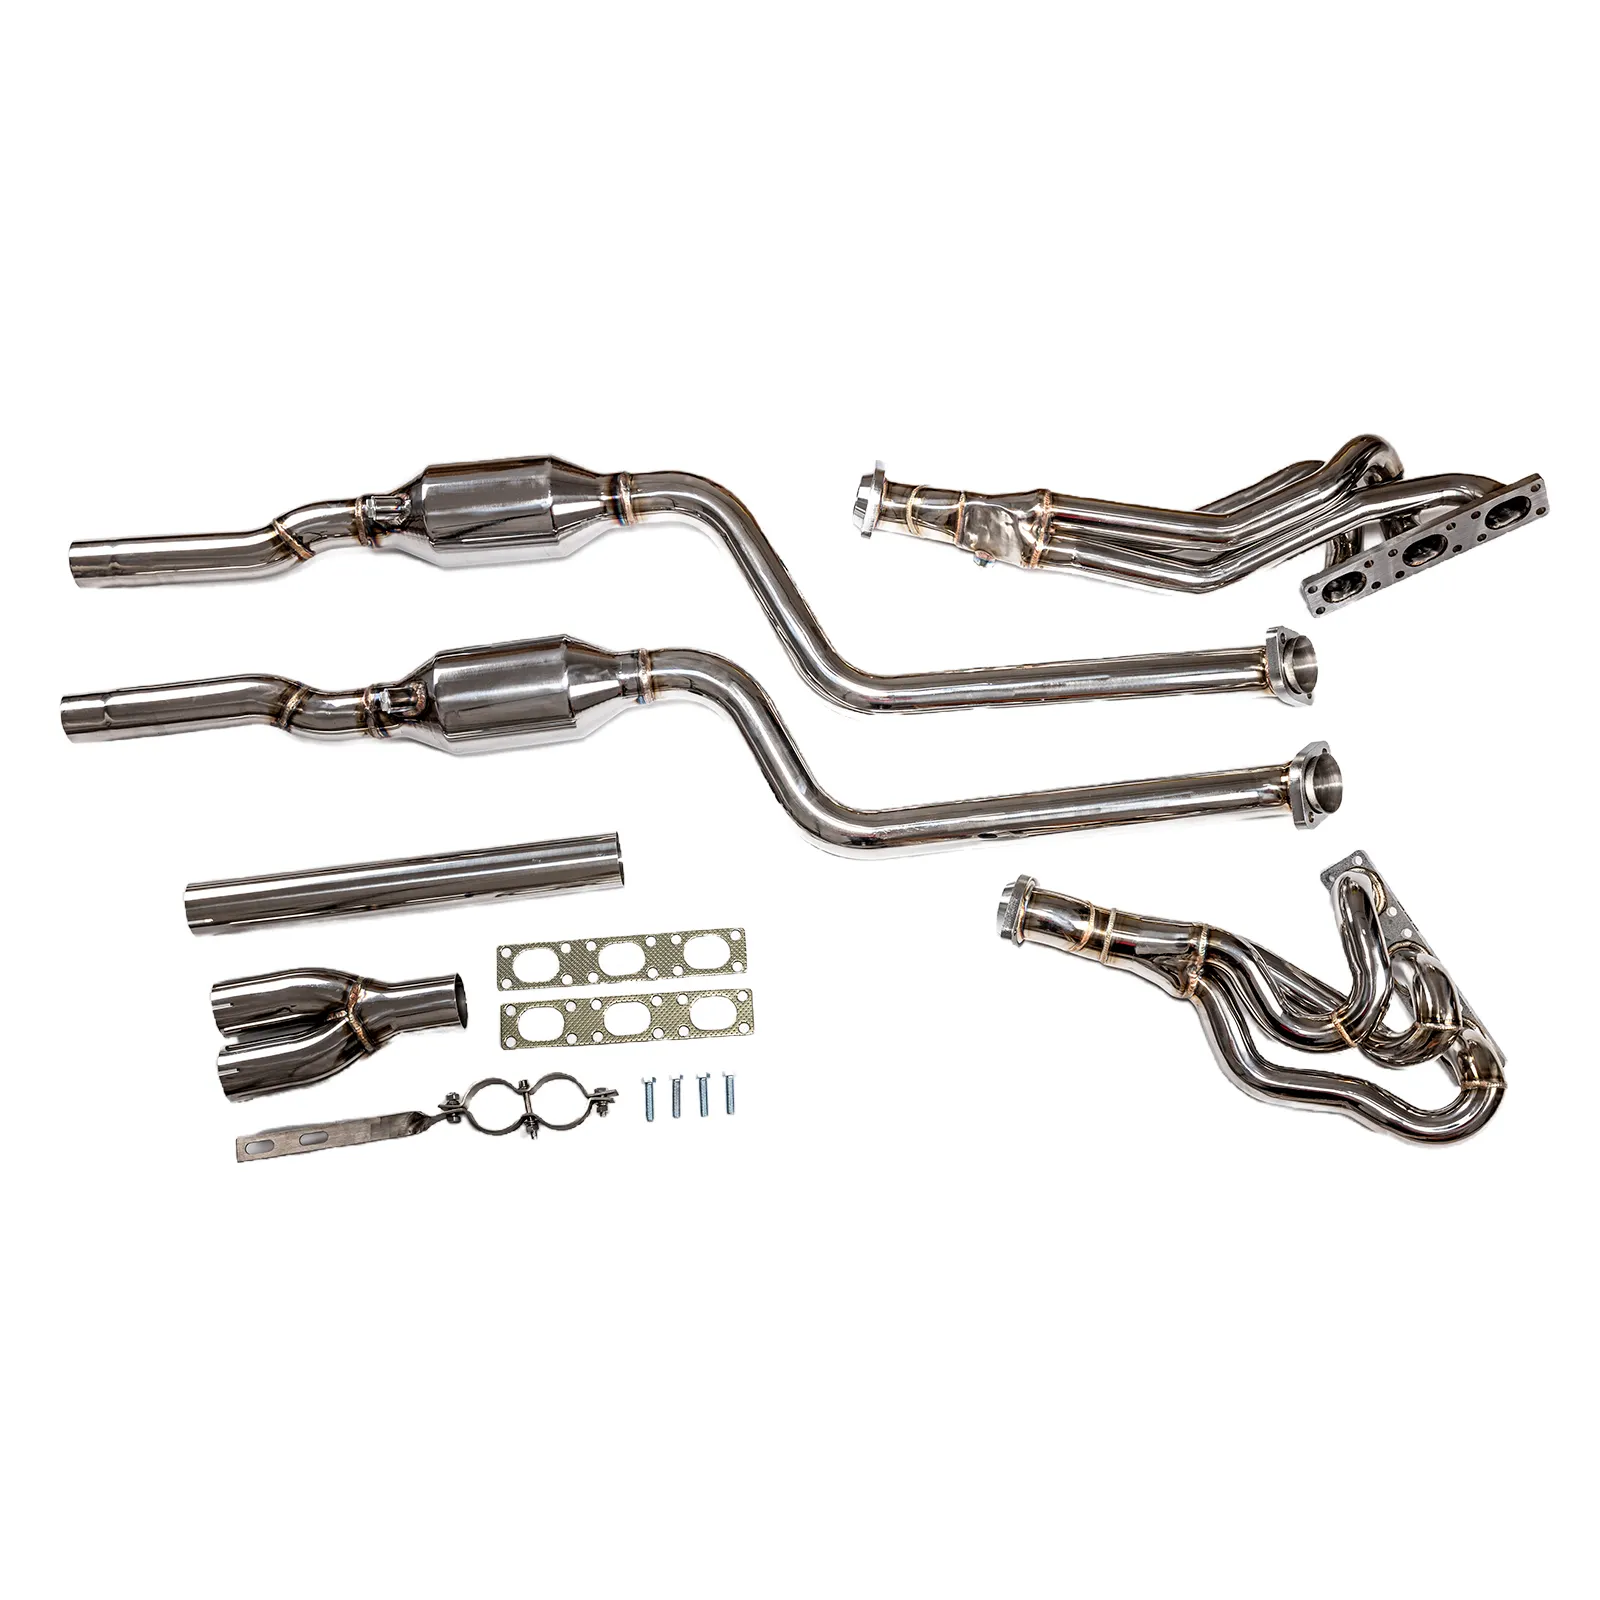 High Quality Polished Stainless Steel Exhaust System Manifold Header for BMW M52/M54 Engines